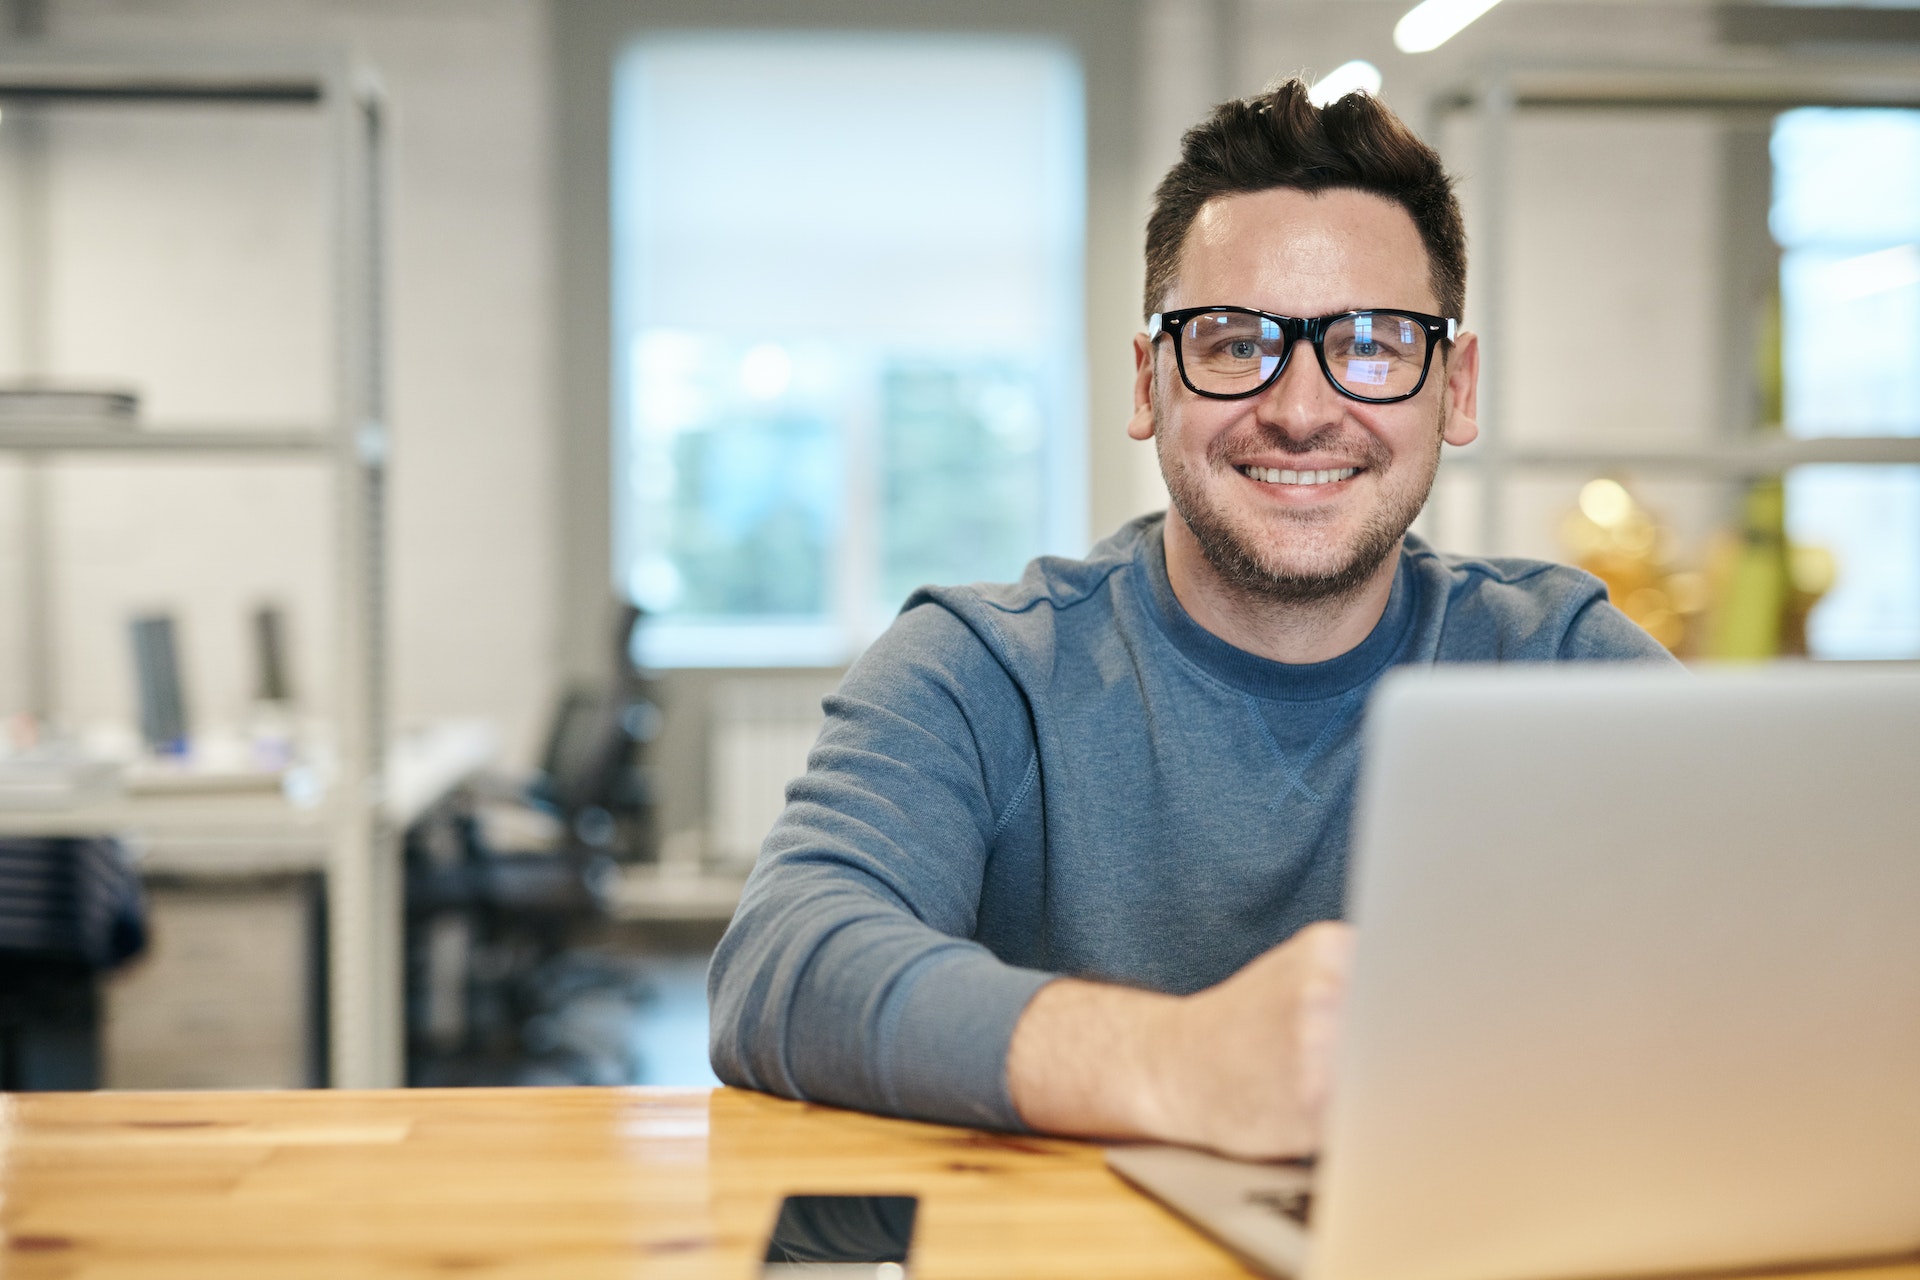 A man smiling while working on his laptop | Source: Pexels